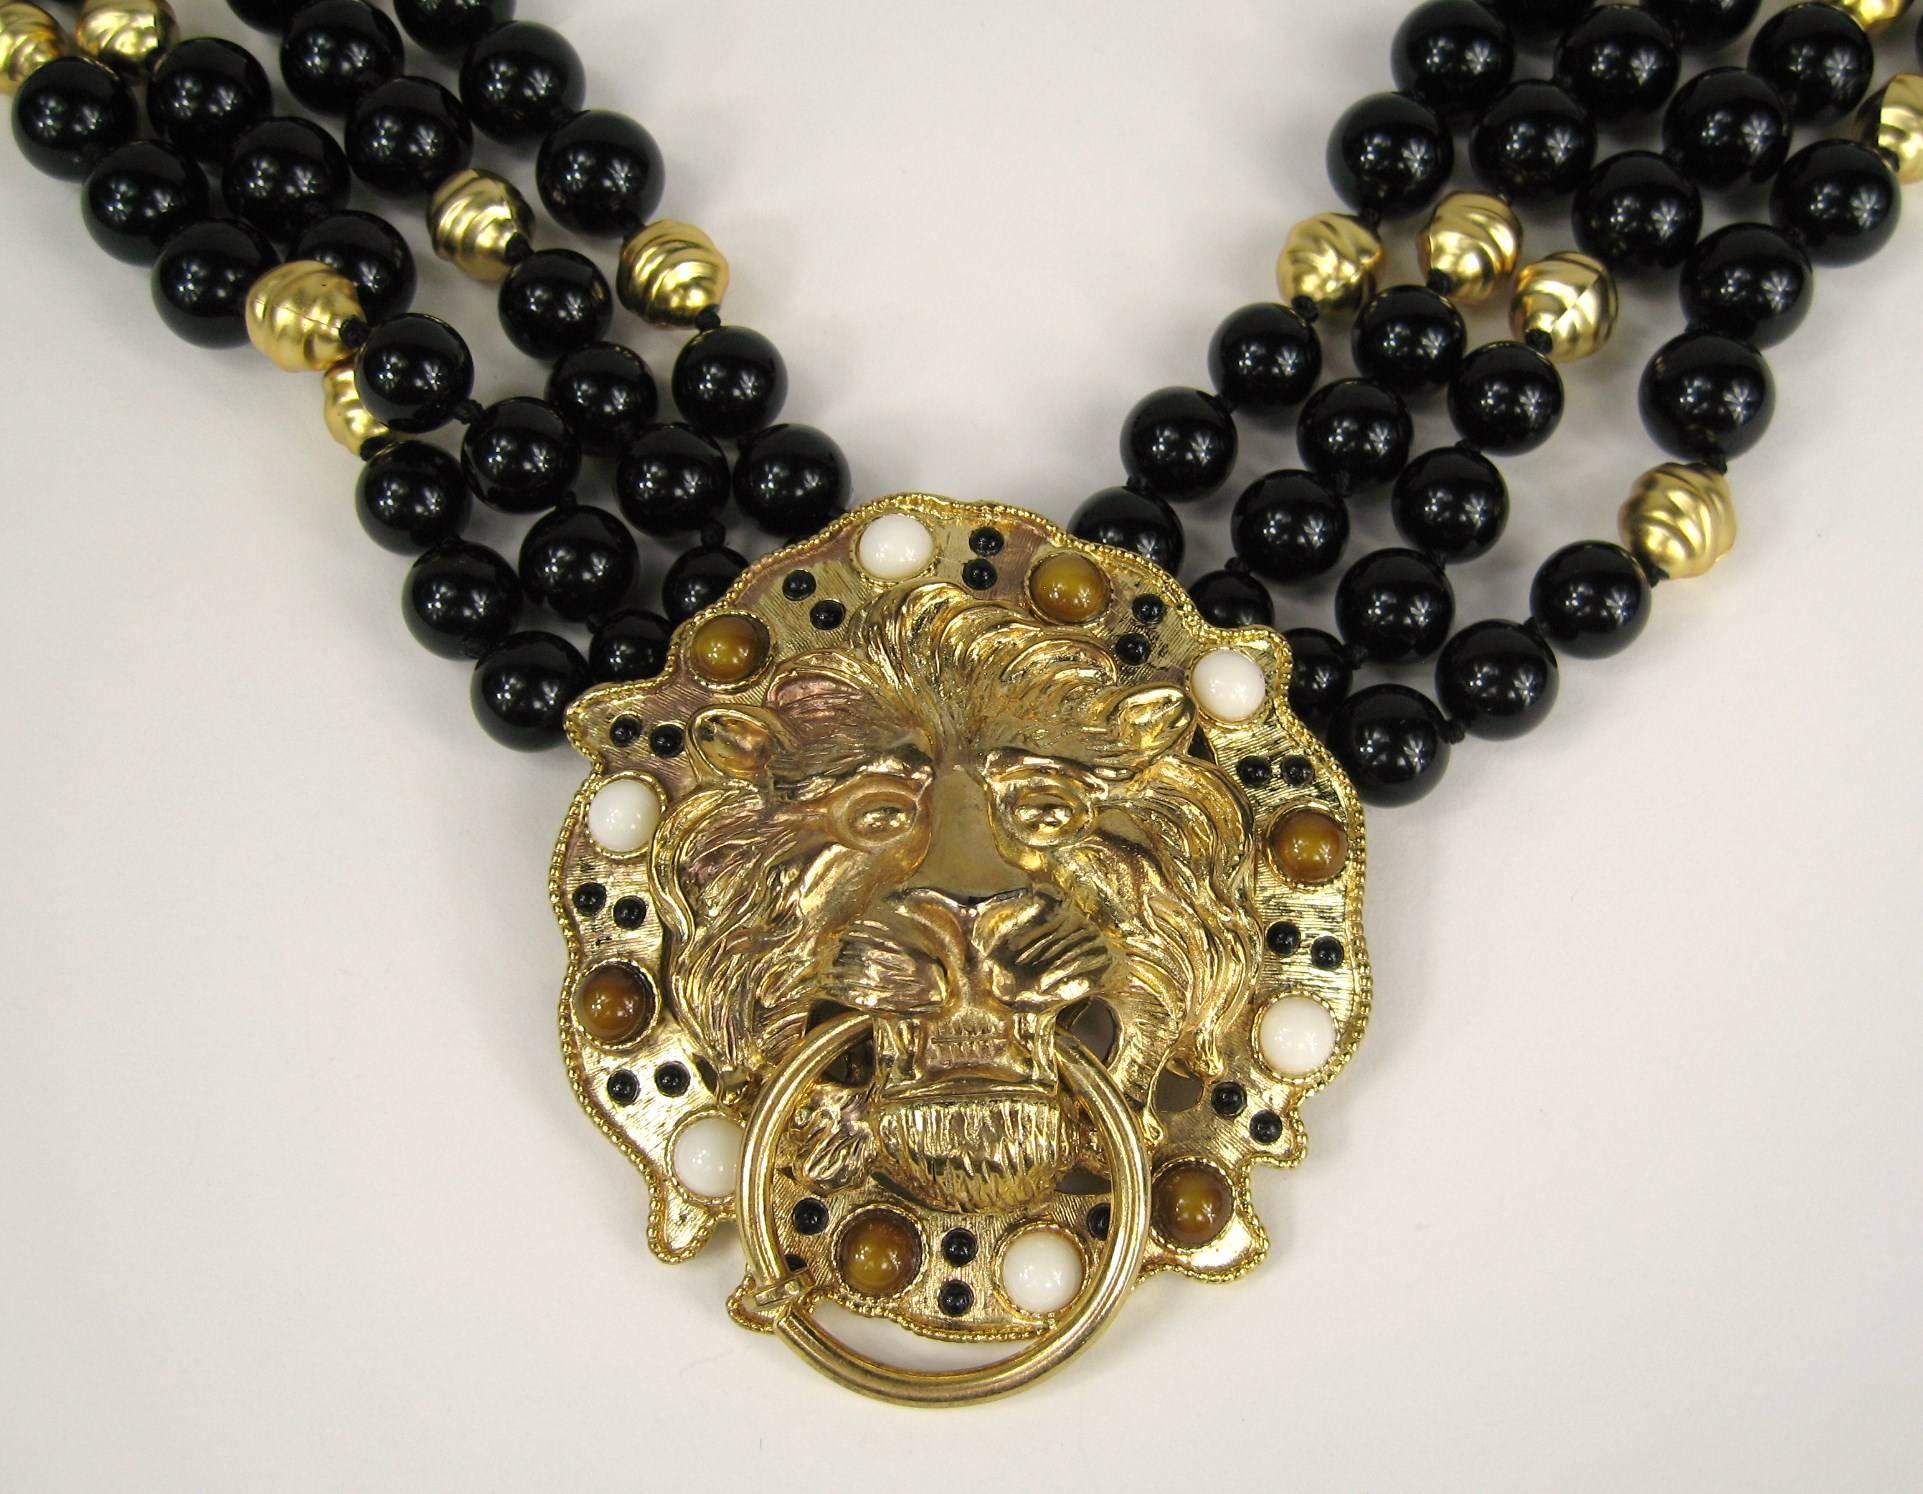 Statement piece on this Stannard Necklace. 4 strand beads that are stationary to the Lions face. Measuring 3.20  x 3.05 and is approx. 17 inches necklace. Hang tag is hallmarked. This is out of a massive collection of Contemporary Fashion as well as